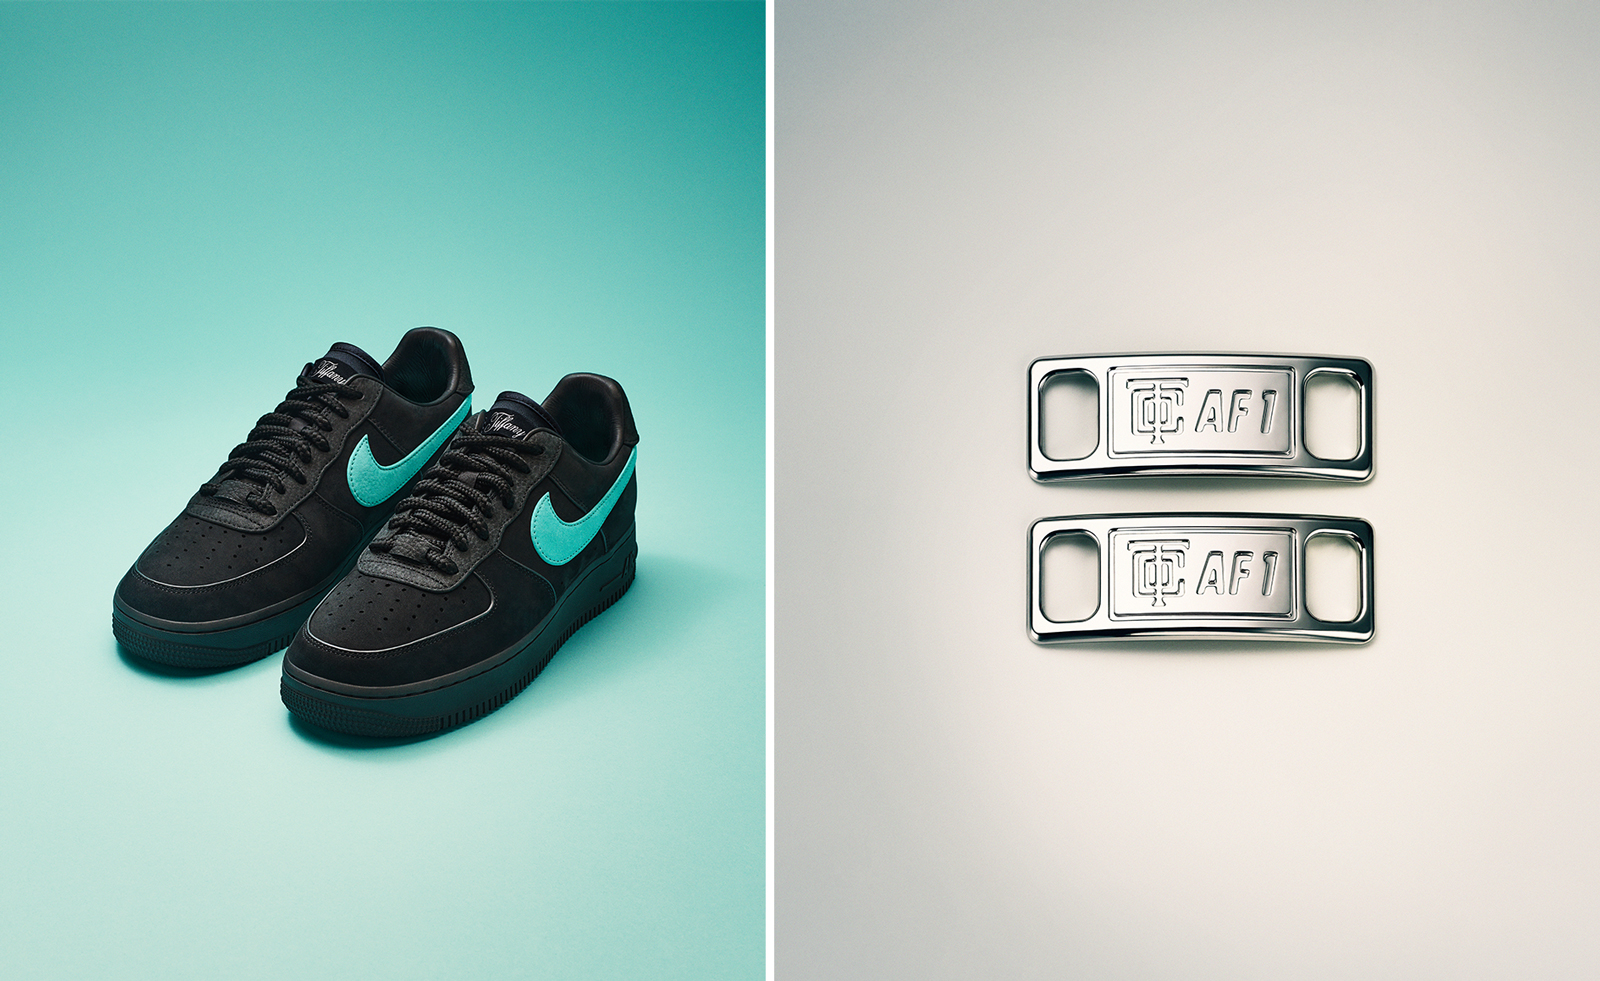 Nike x Tiffany & Co Air Force 1 1837 and silverware | Wallpaper